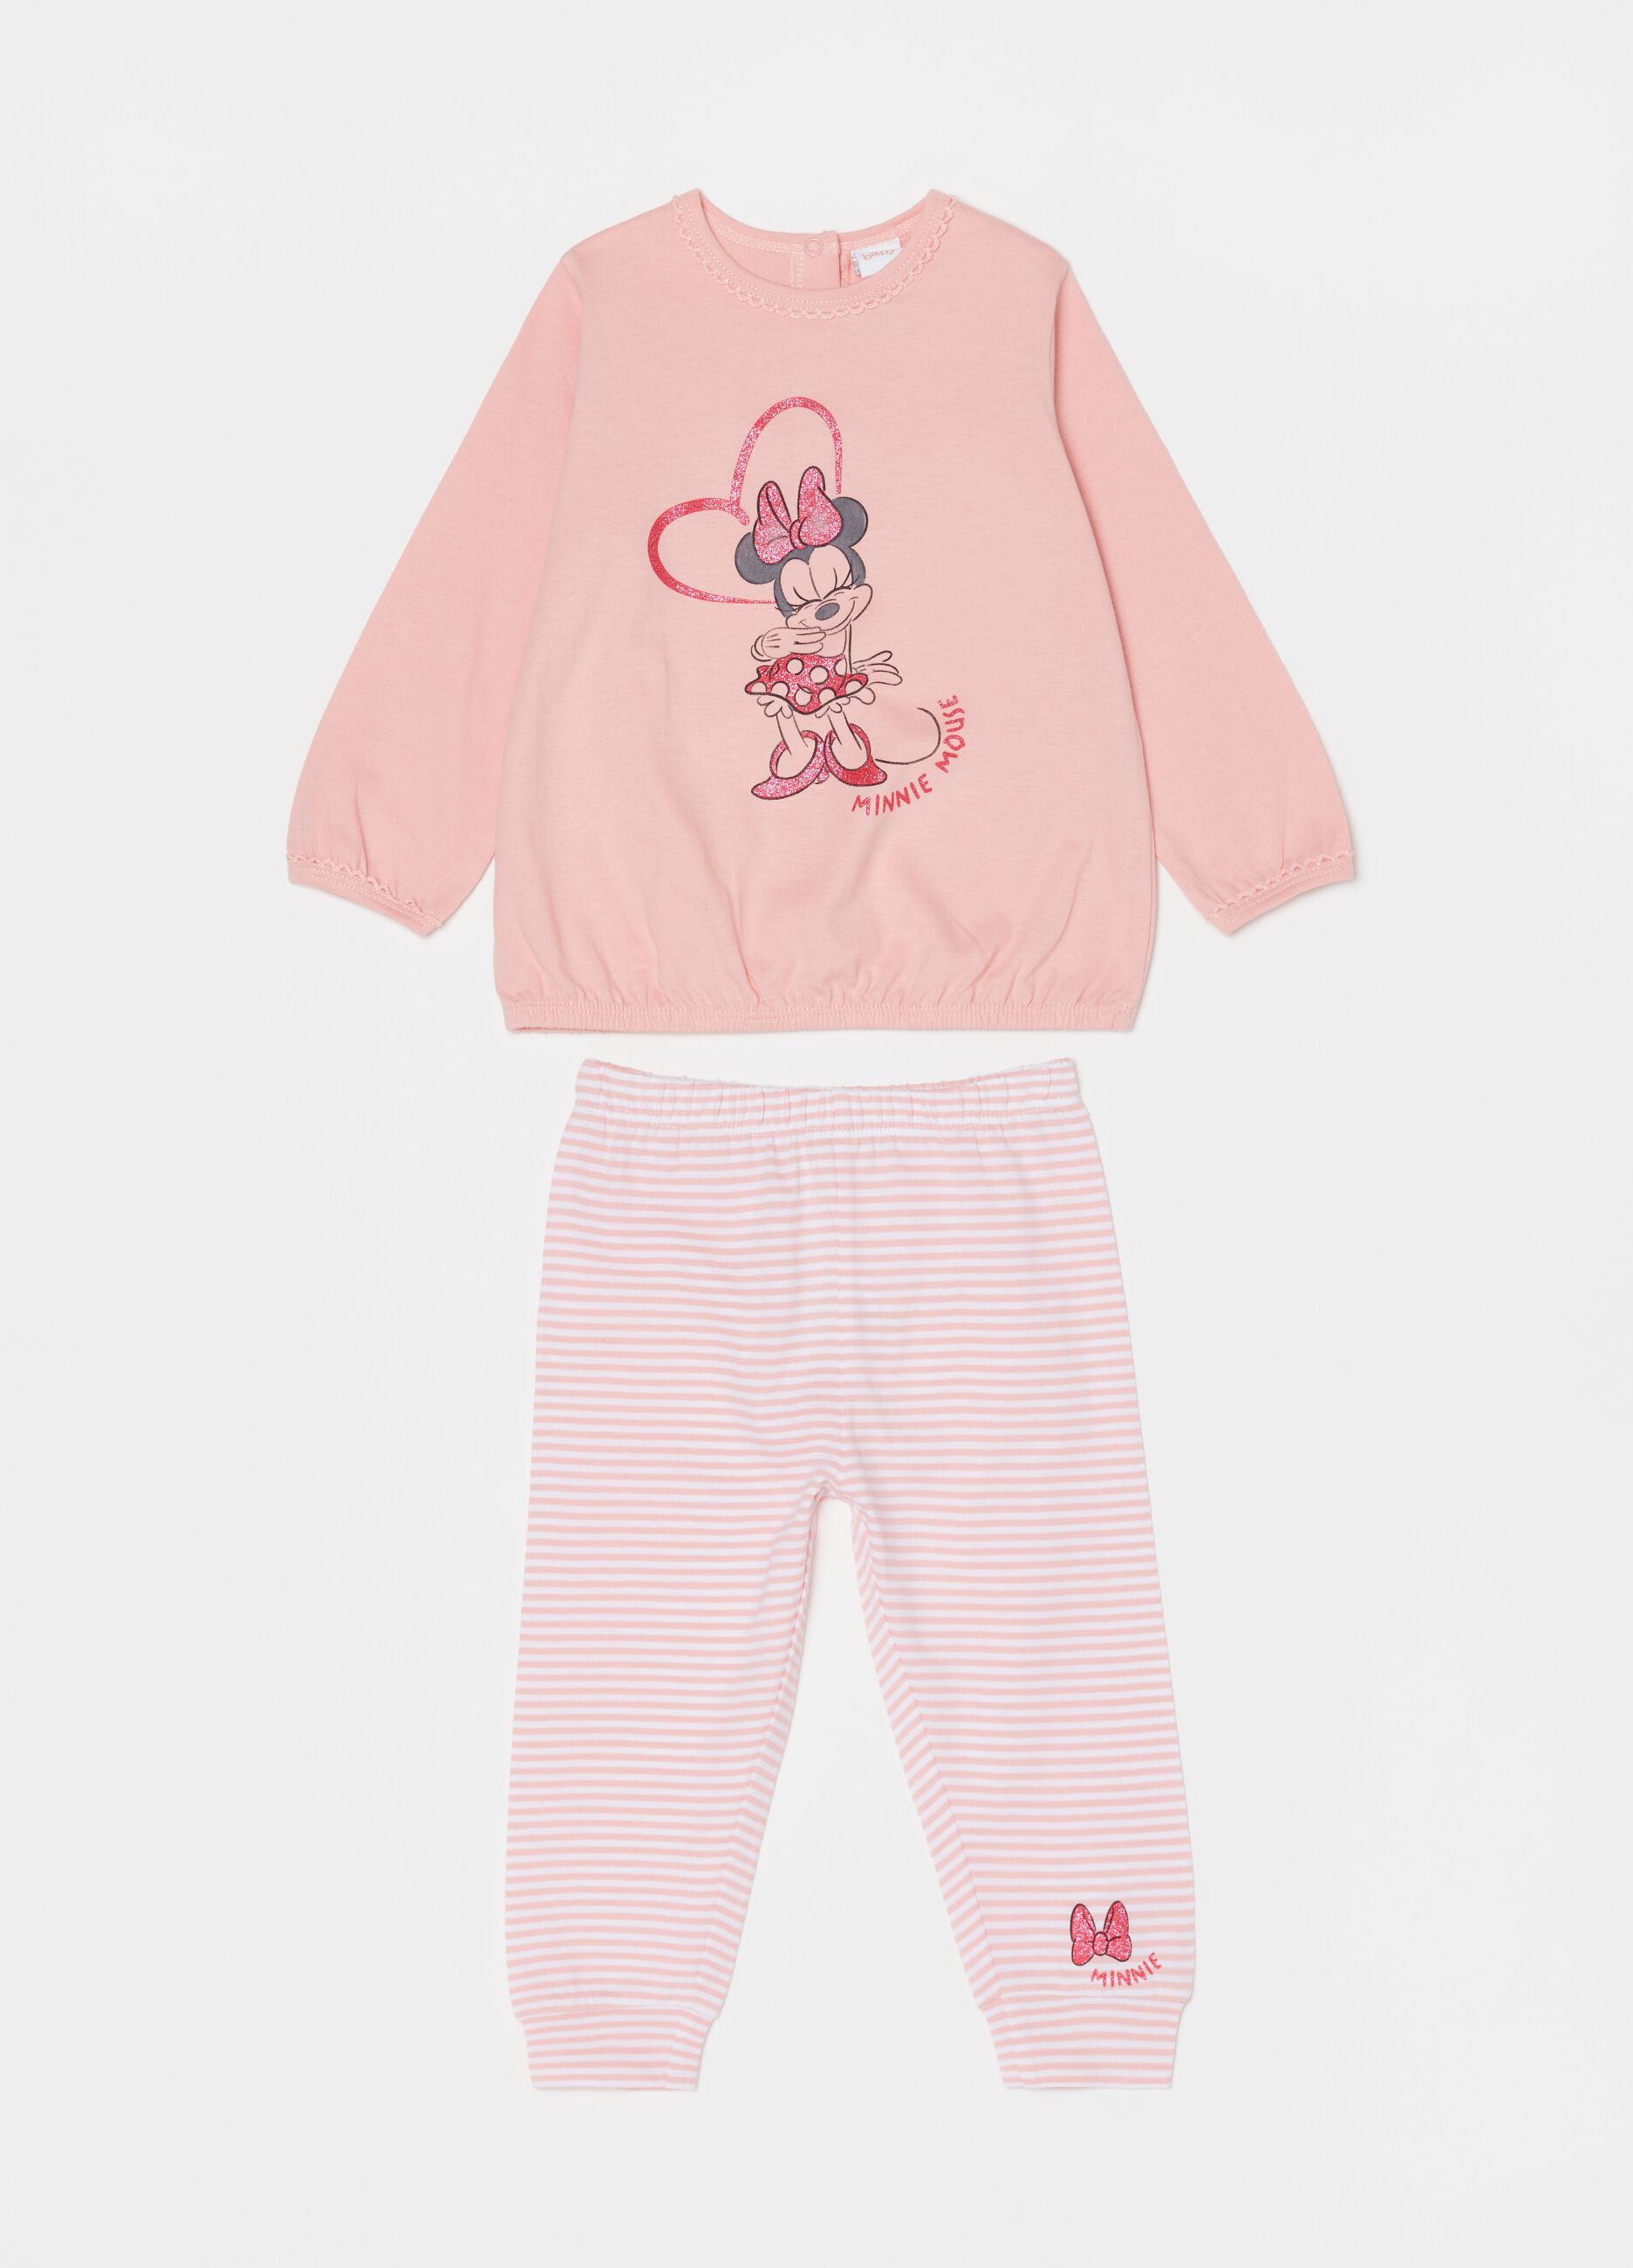 Pyjamas in 100% cotton with Minnie Mouse print